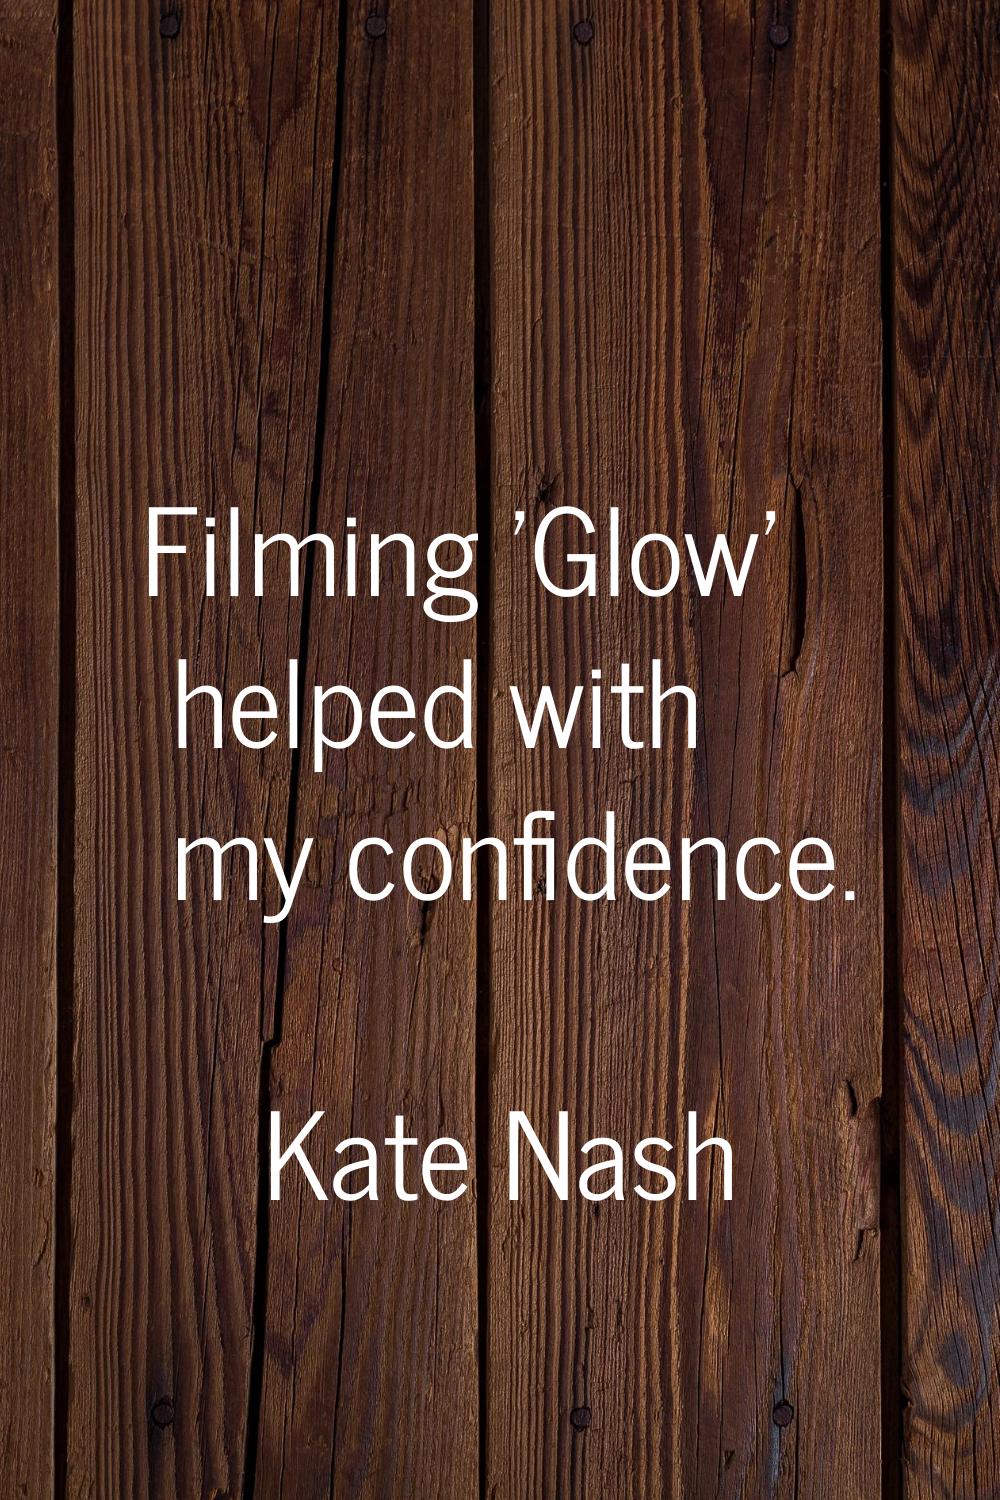 Filming 'Glow' helped with my confidence.